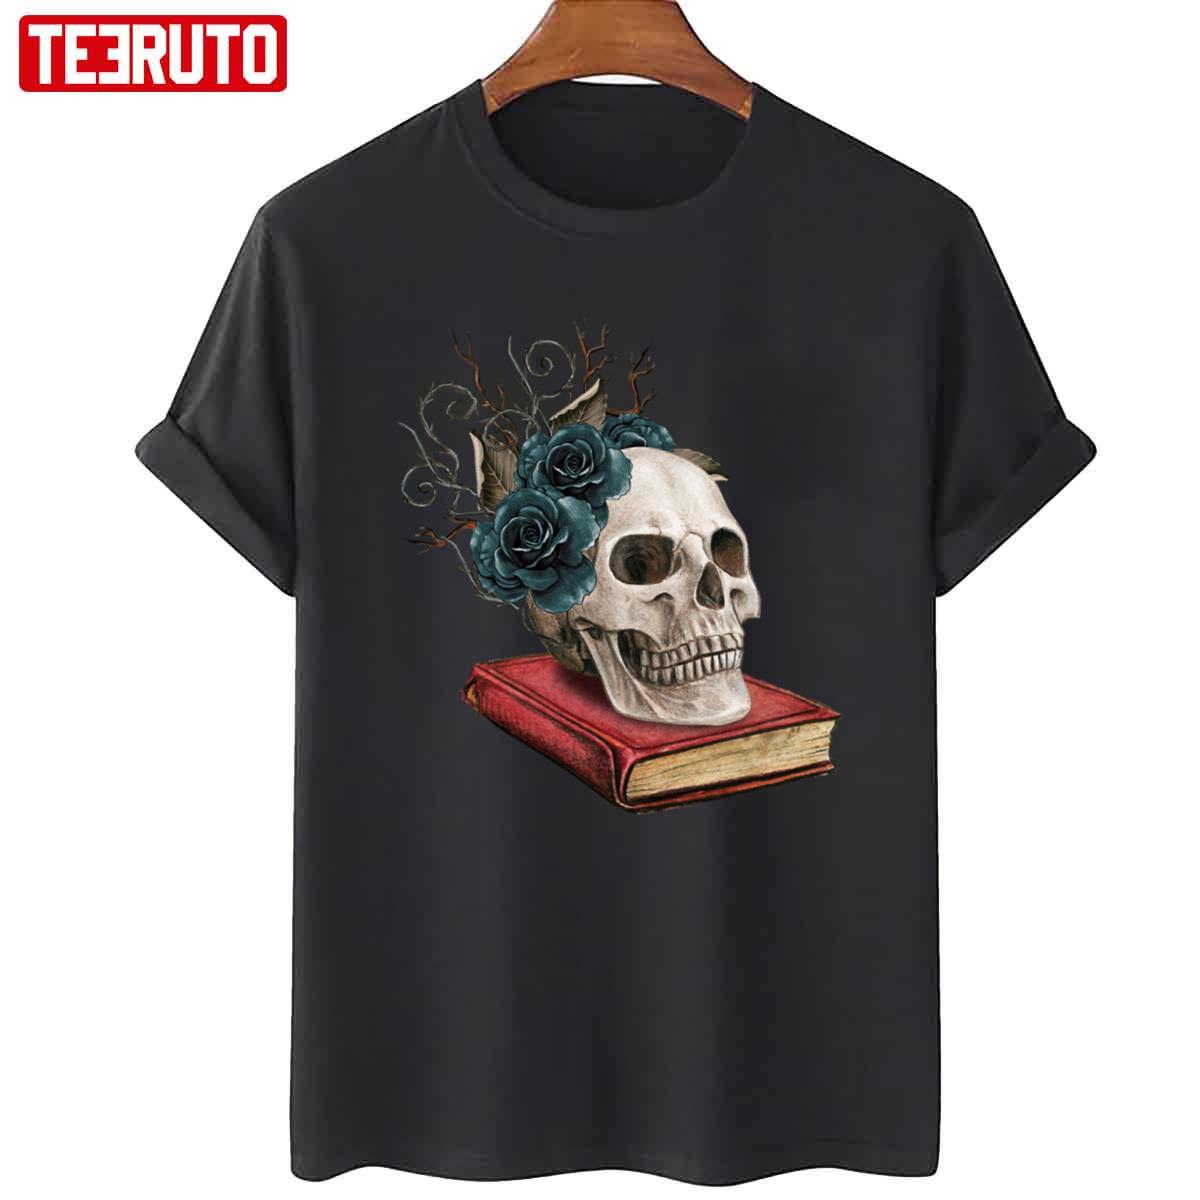 Watercolor Gothic Skull On A Book With Thorns And Black Roses Unisex Sweatshirt